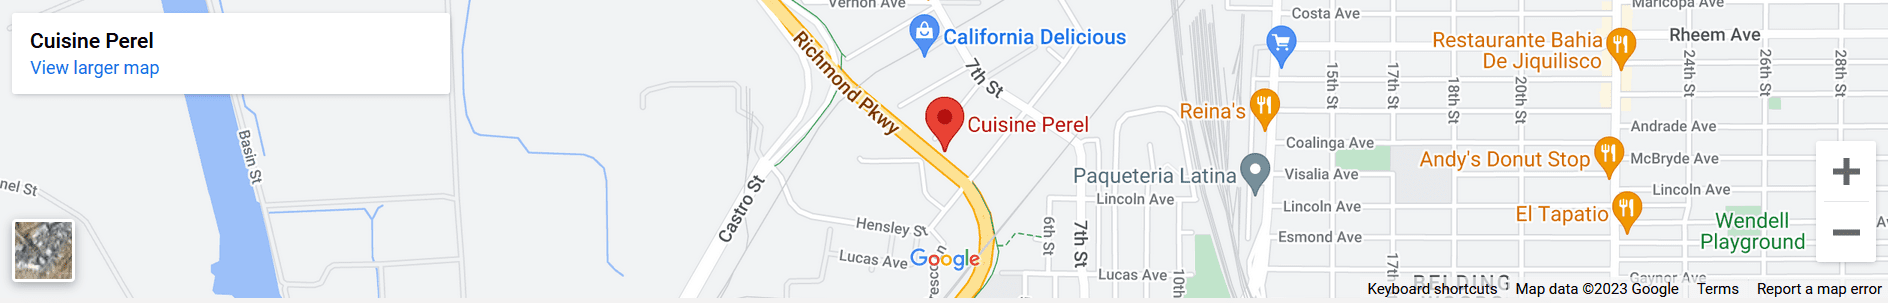 A map of the location of cuisine perel.